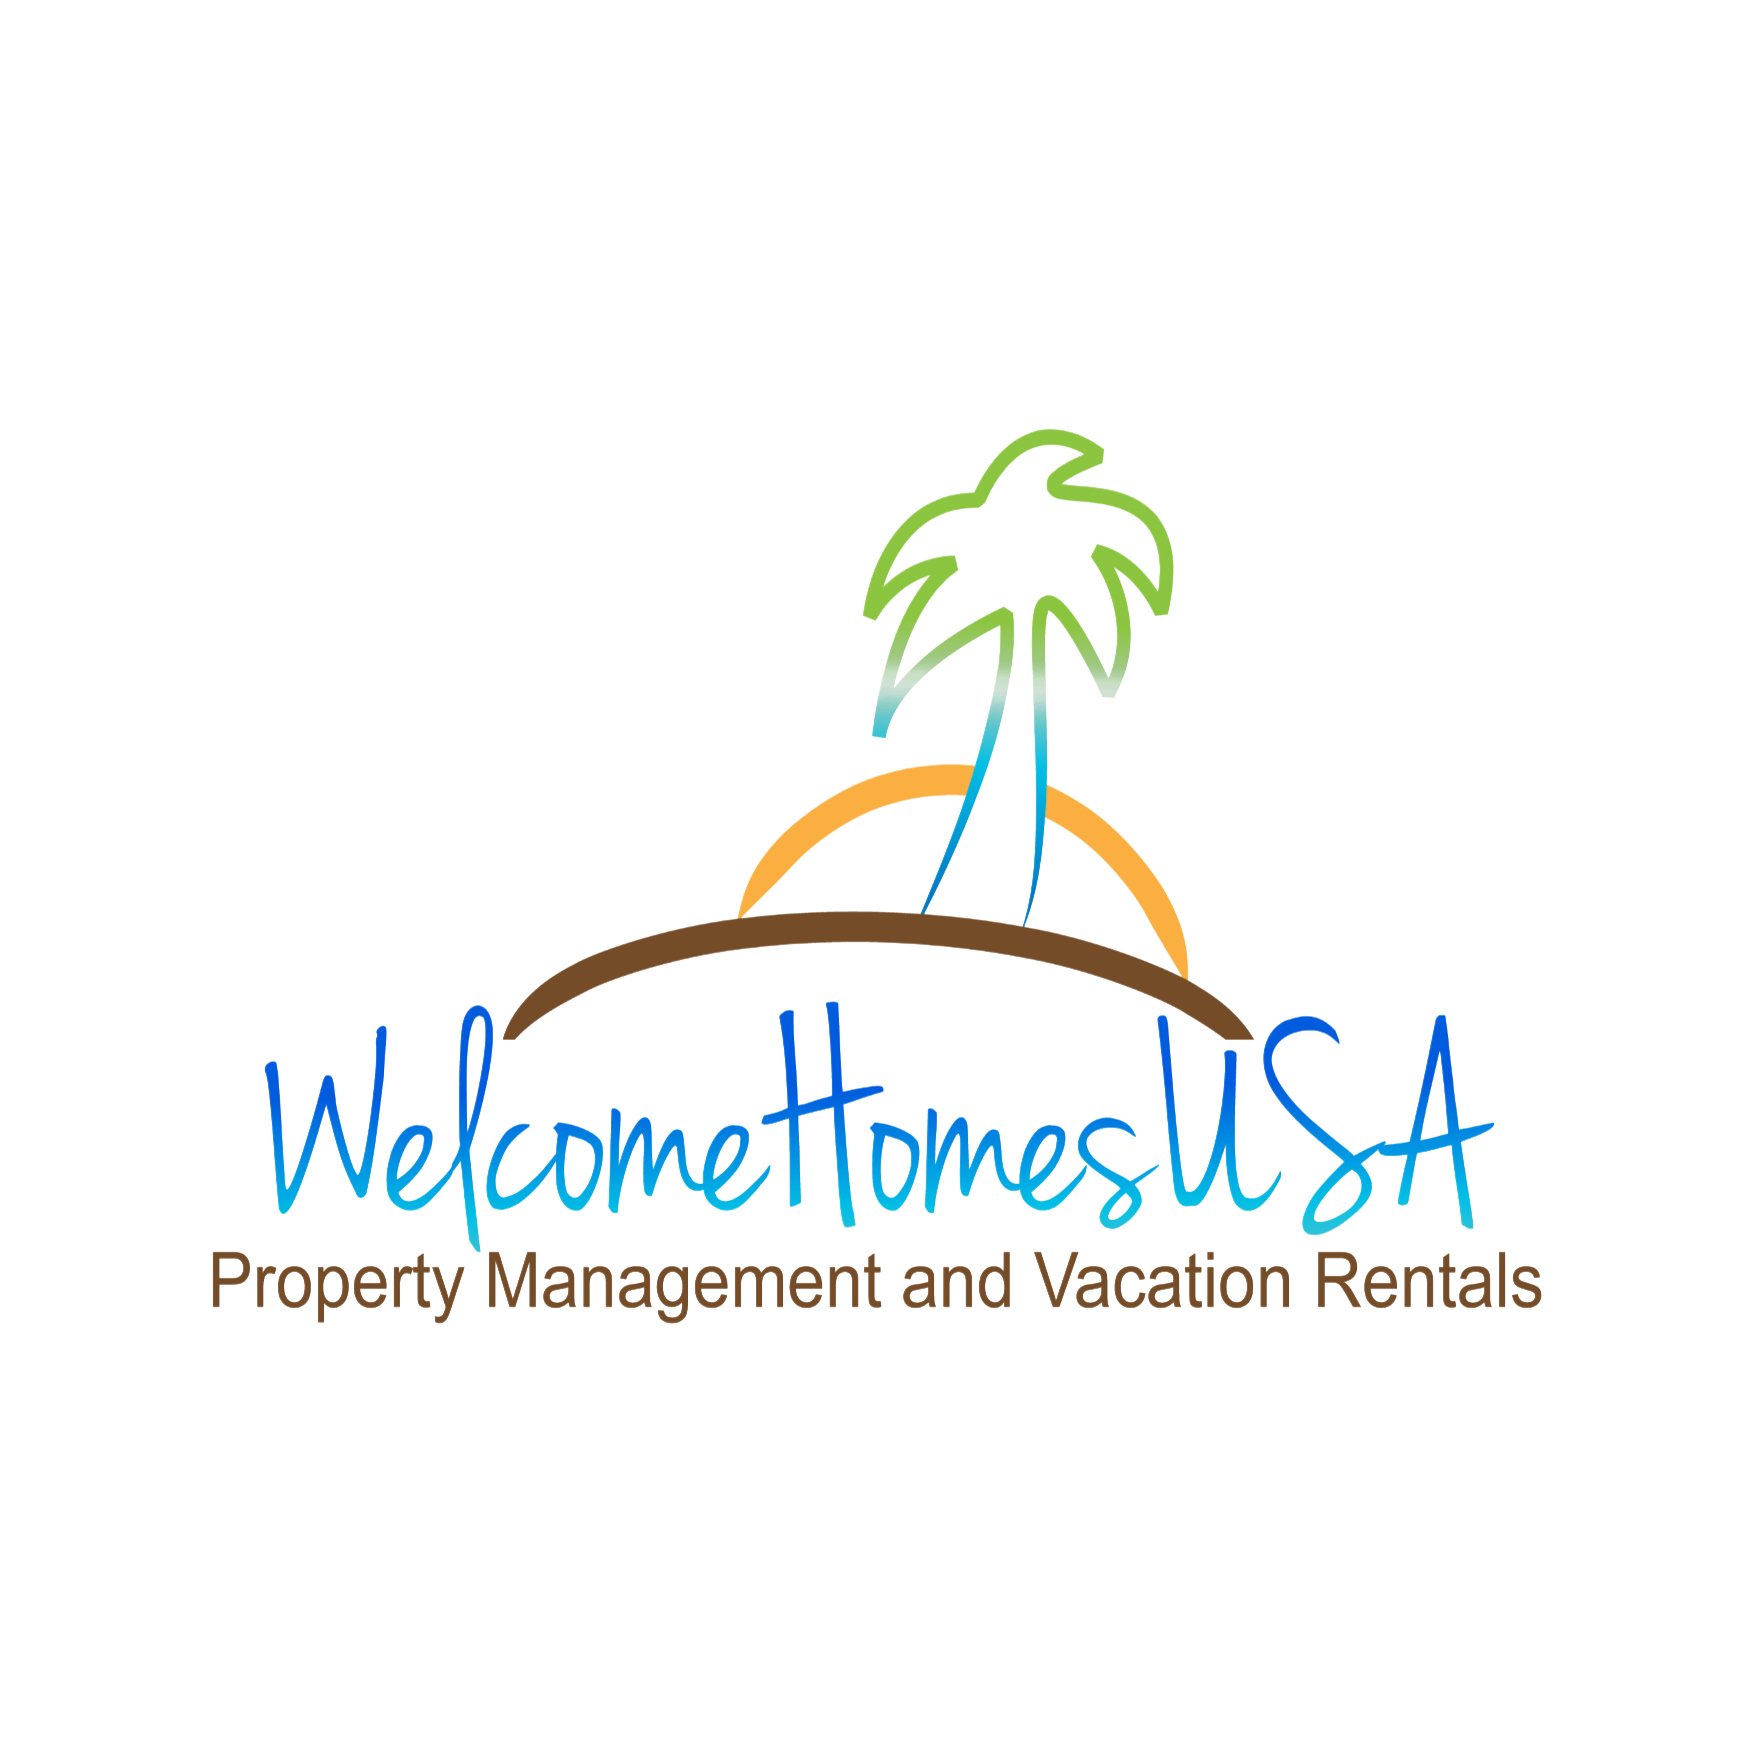 Based in sunny Orlando, we’re a vacation rental management company with a focus on delivering amazing experiences for guests and investors alike.